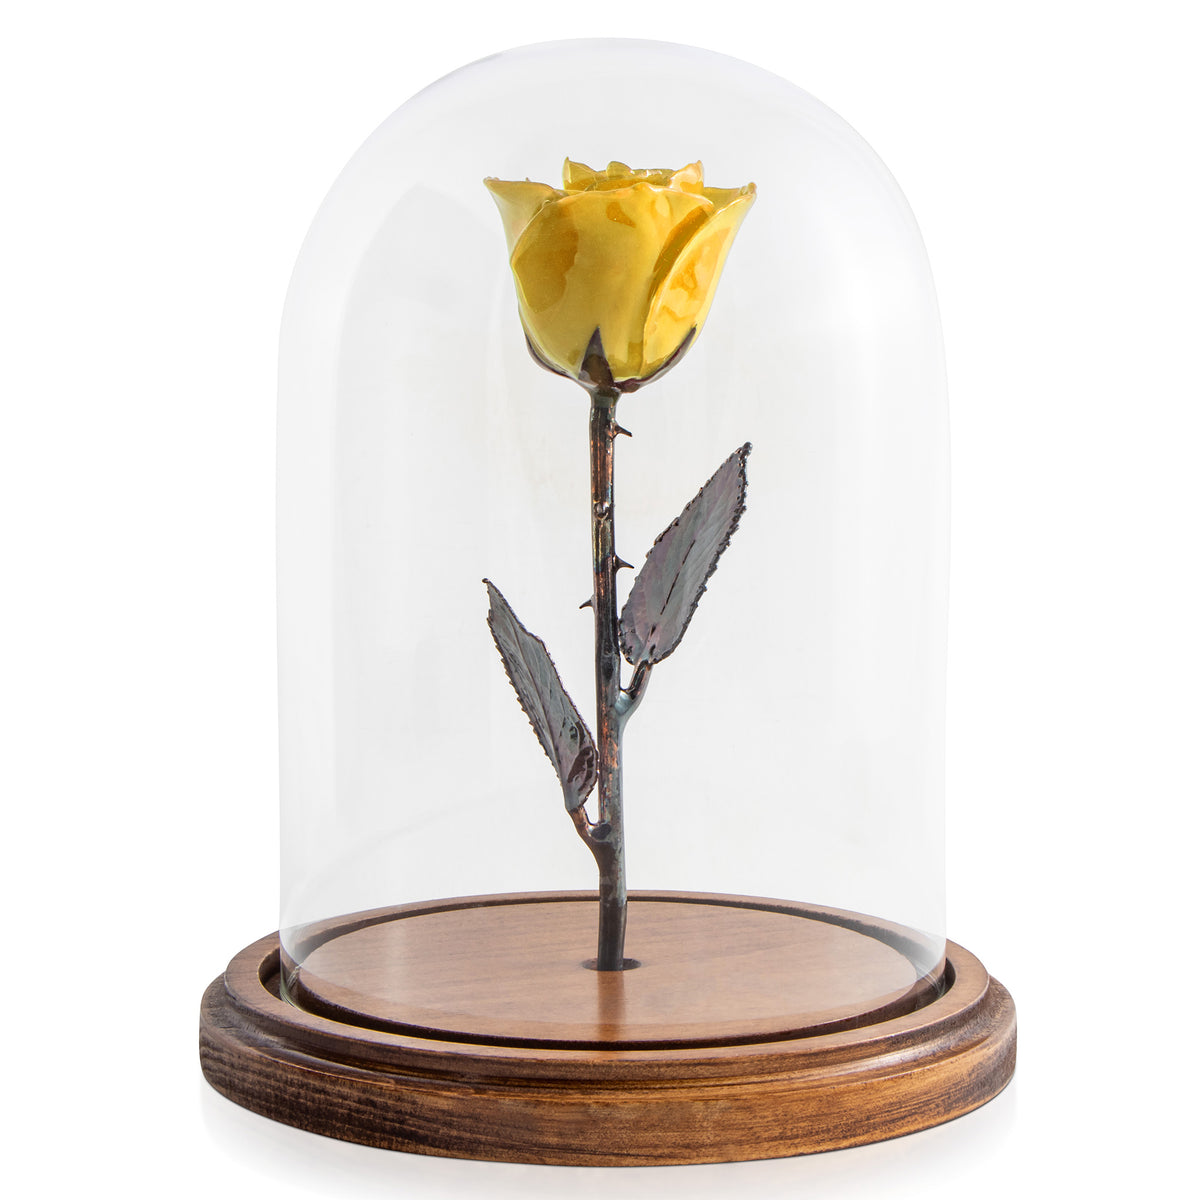 Yellow Enchanted Rose (aka Beauty &amp; The Beast Rose) with Patina Copper Stem Mounted to A Hand Turned Solid Wood Base under a glass dome.